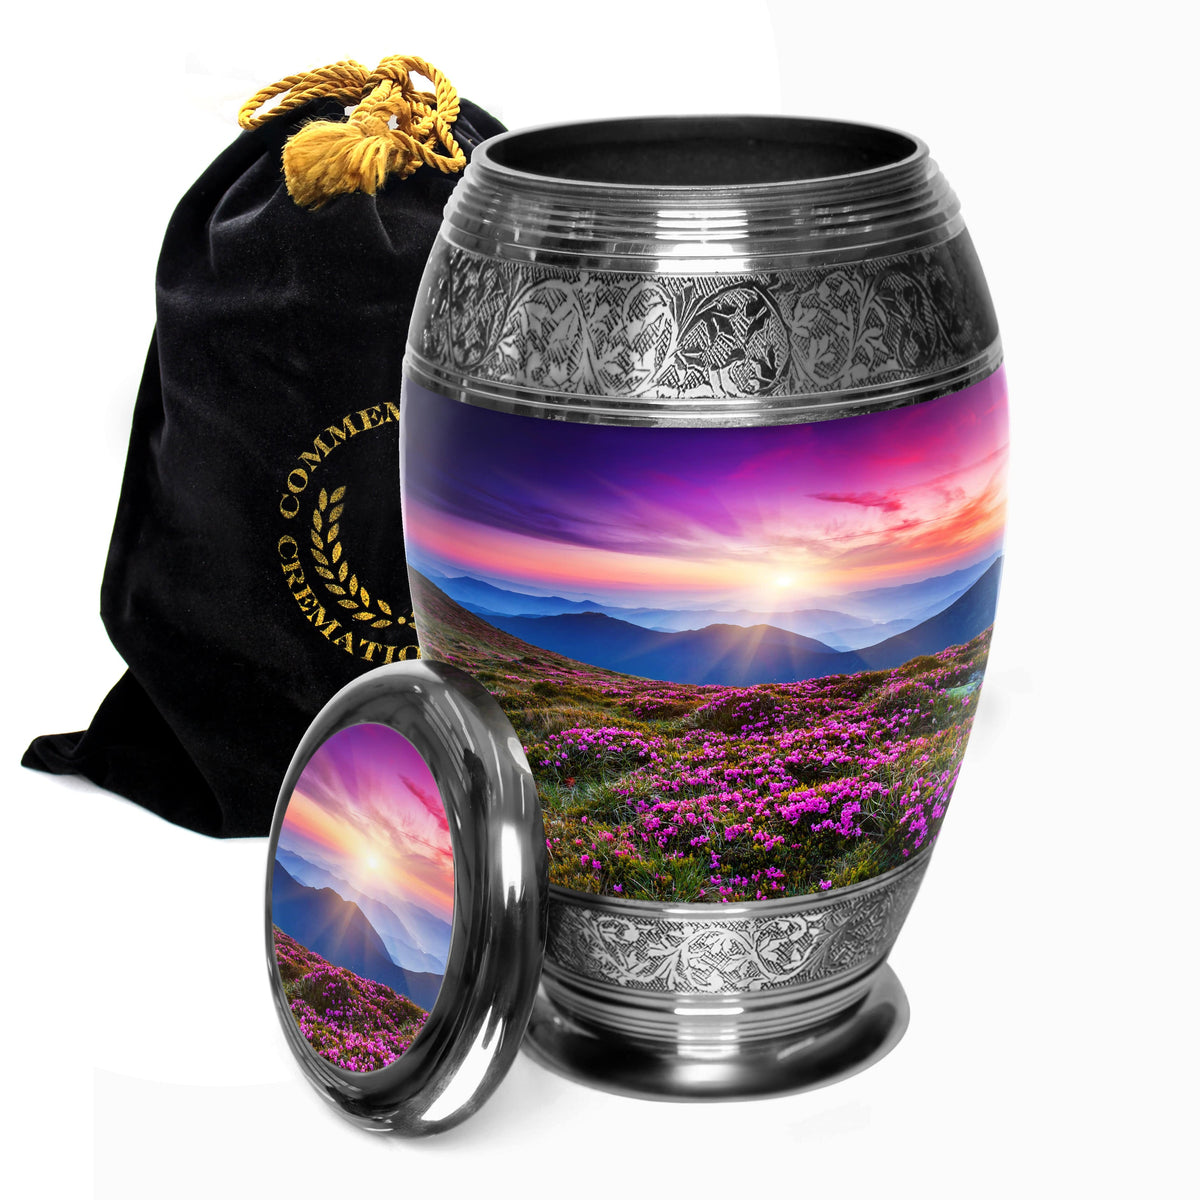 Commemorative Cremation Urns Large Heaven on Earth Cremation Urn